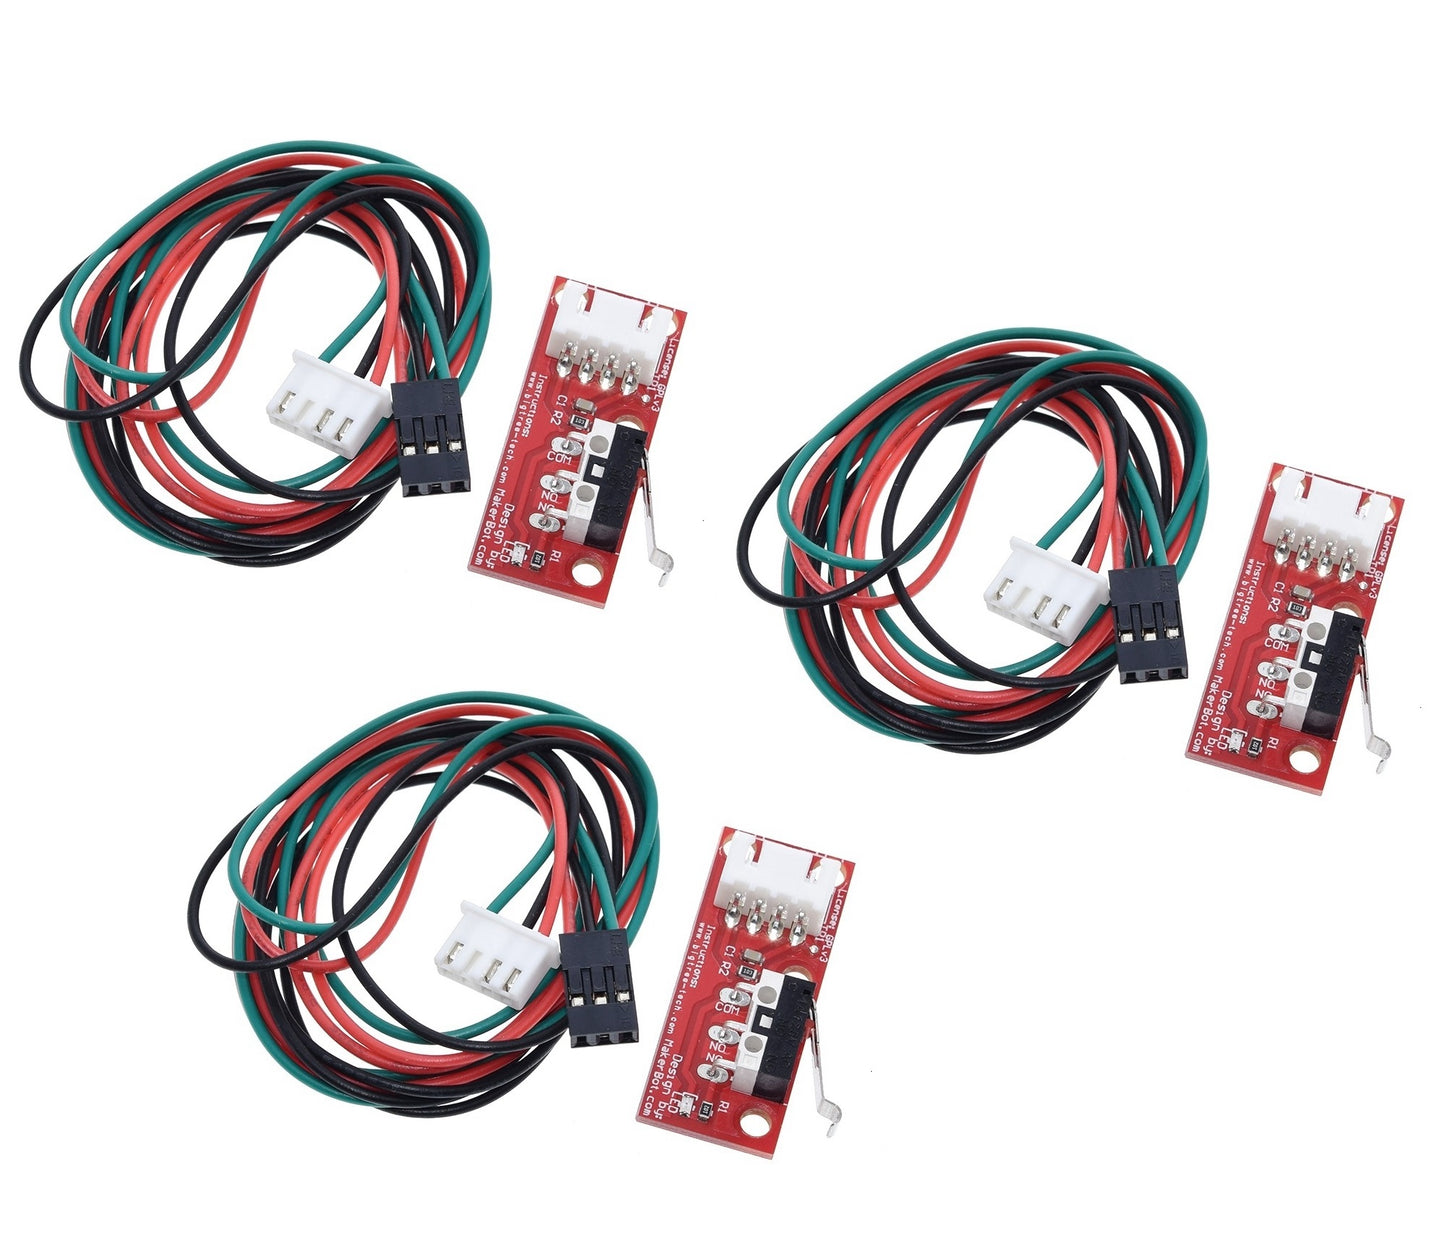 Endstop Mechanical Limit Switches with 3 Pin 70cm Cable (3 pack)